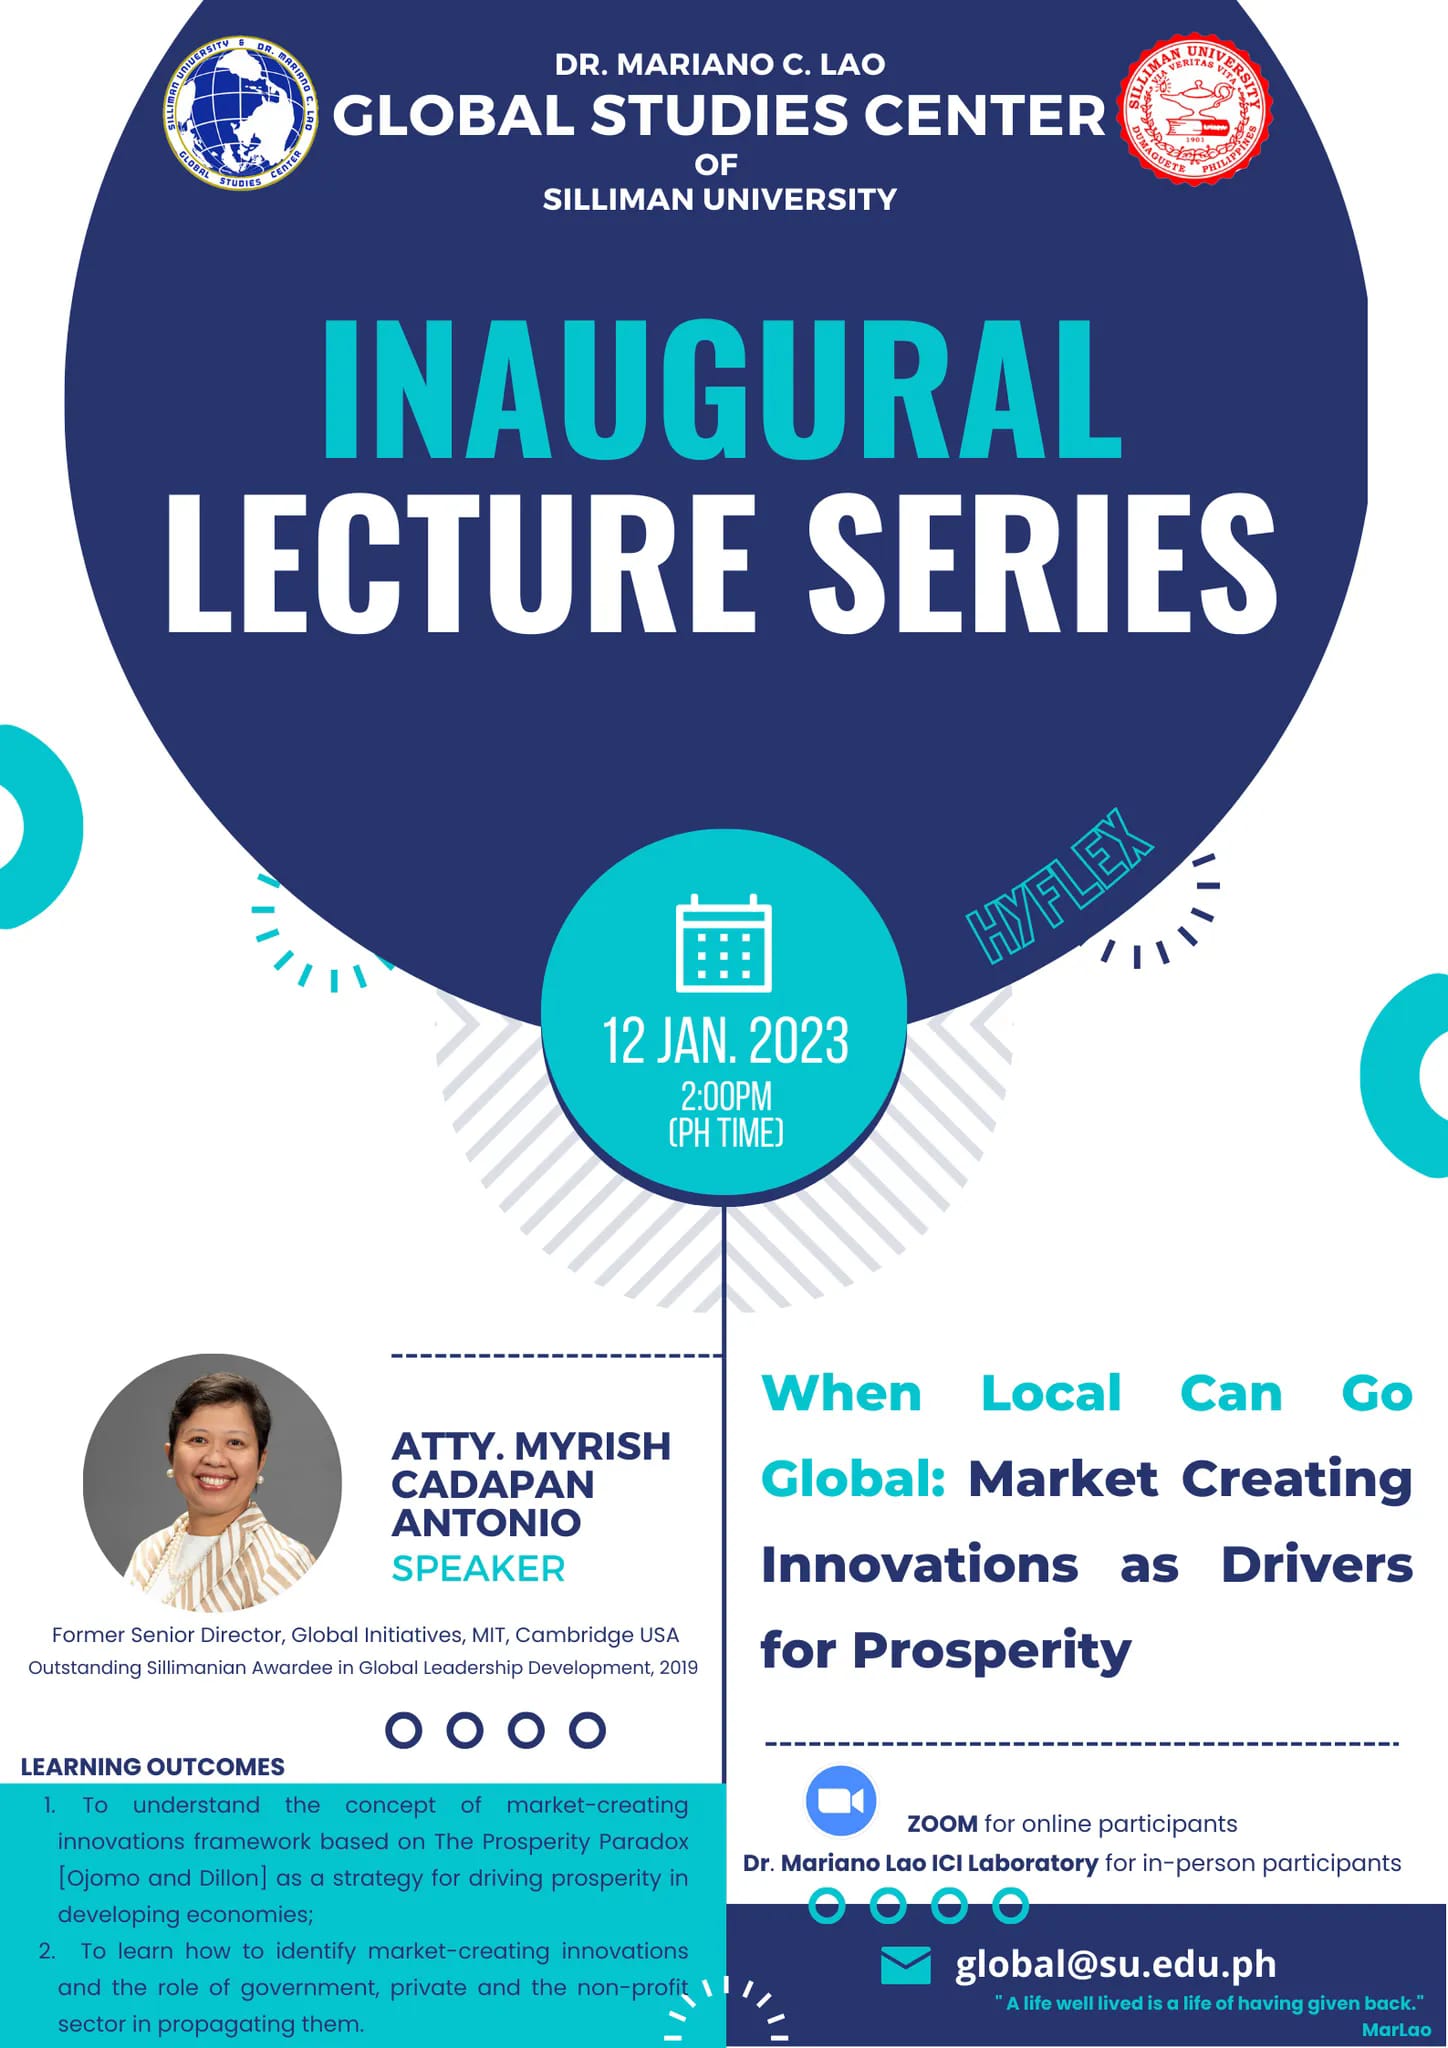 SU-Lao Global Studies Center to hold inaugural lecture series